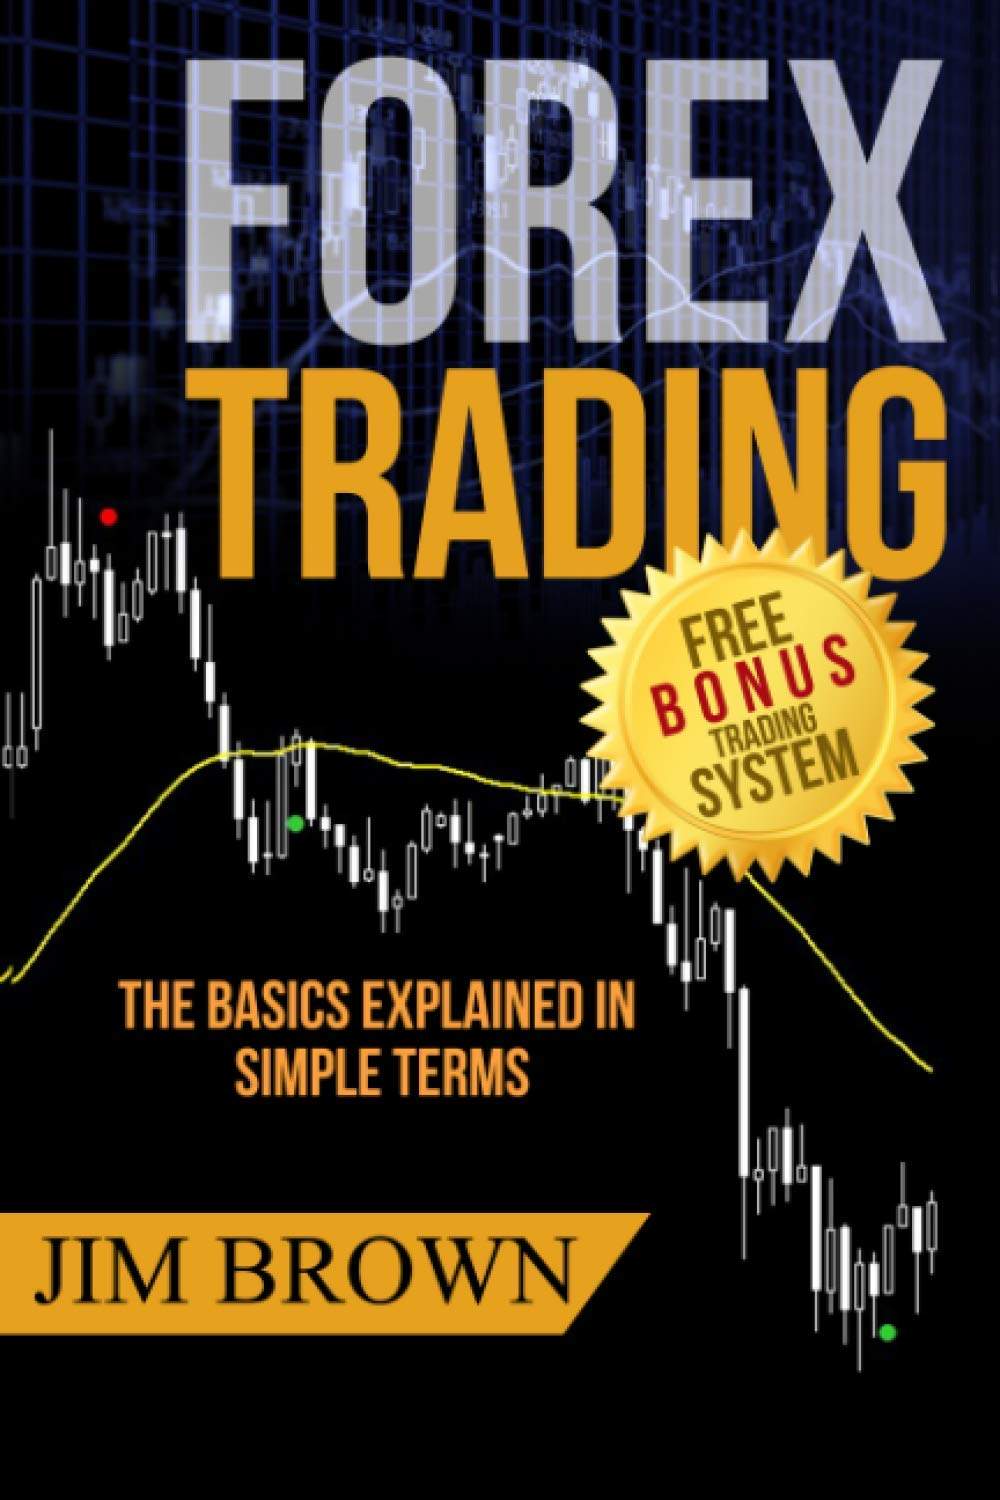 Best forex trading books: FOREX TRADING by Jim Brown